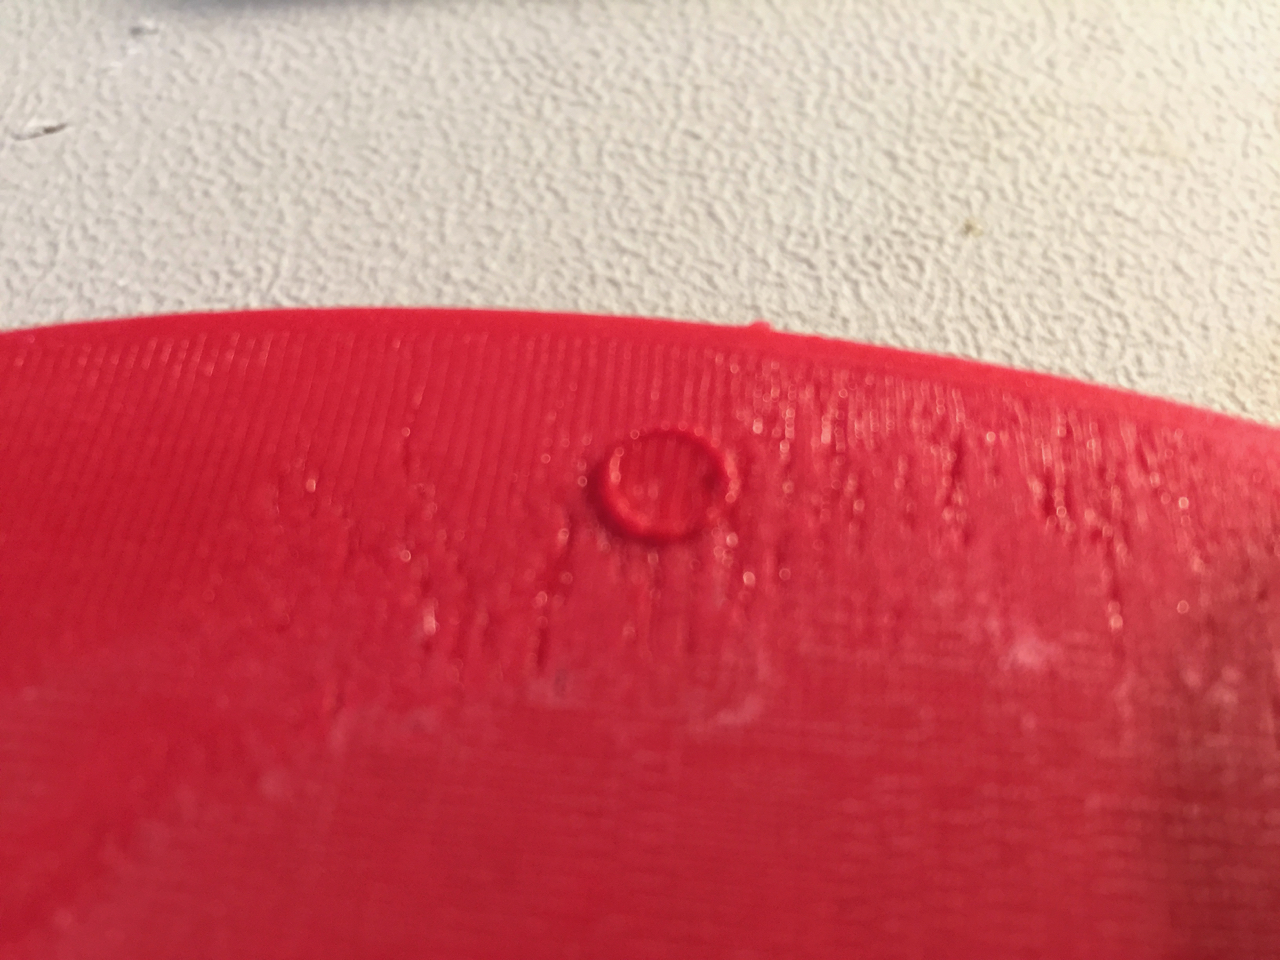  If 3D printing raftless overtop of the build plate buttons, you get an effect like this 